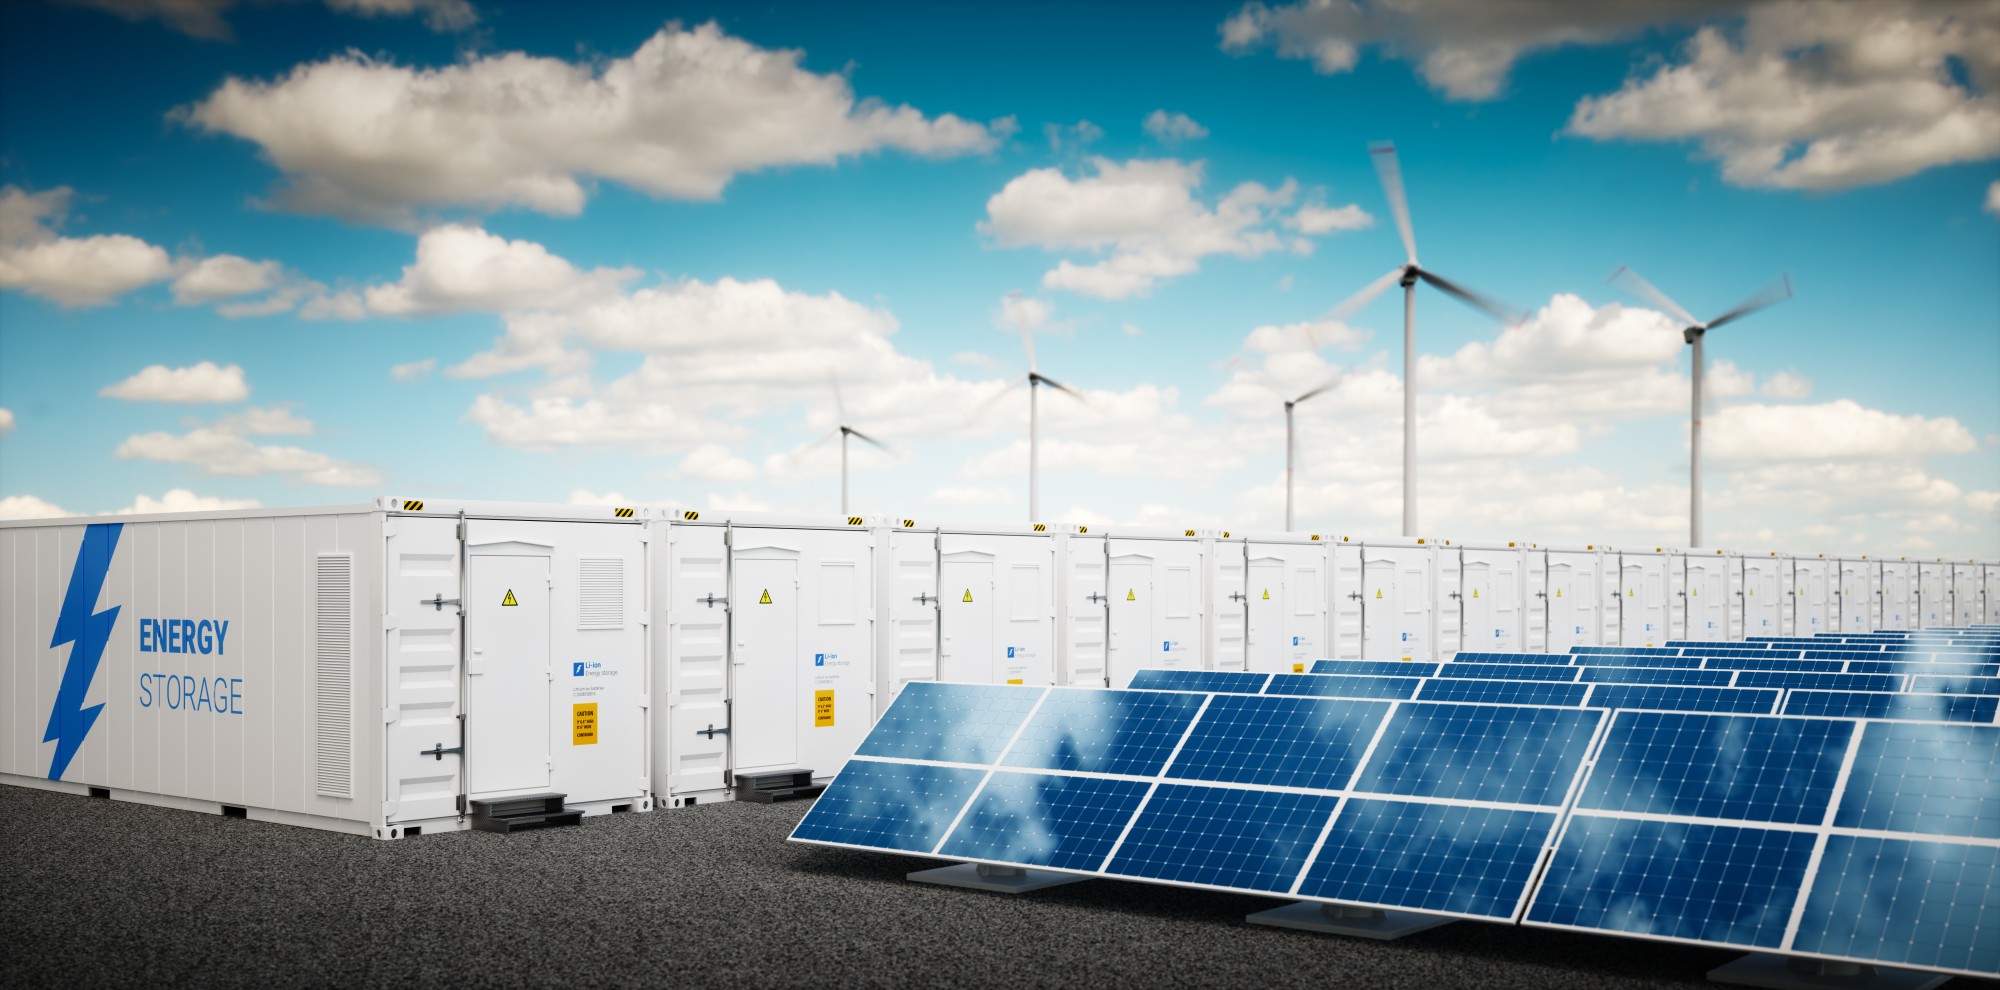 DOE signs MOU to Accelerate Long-Duration Energy Storage